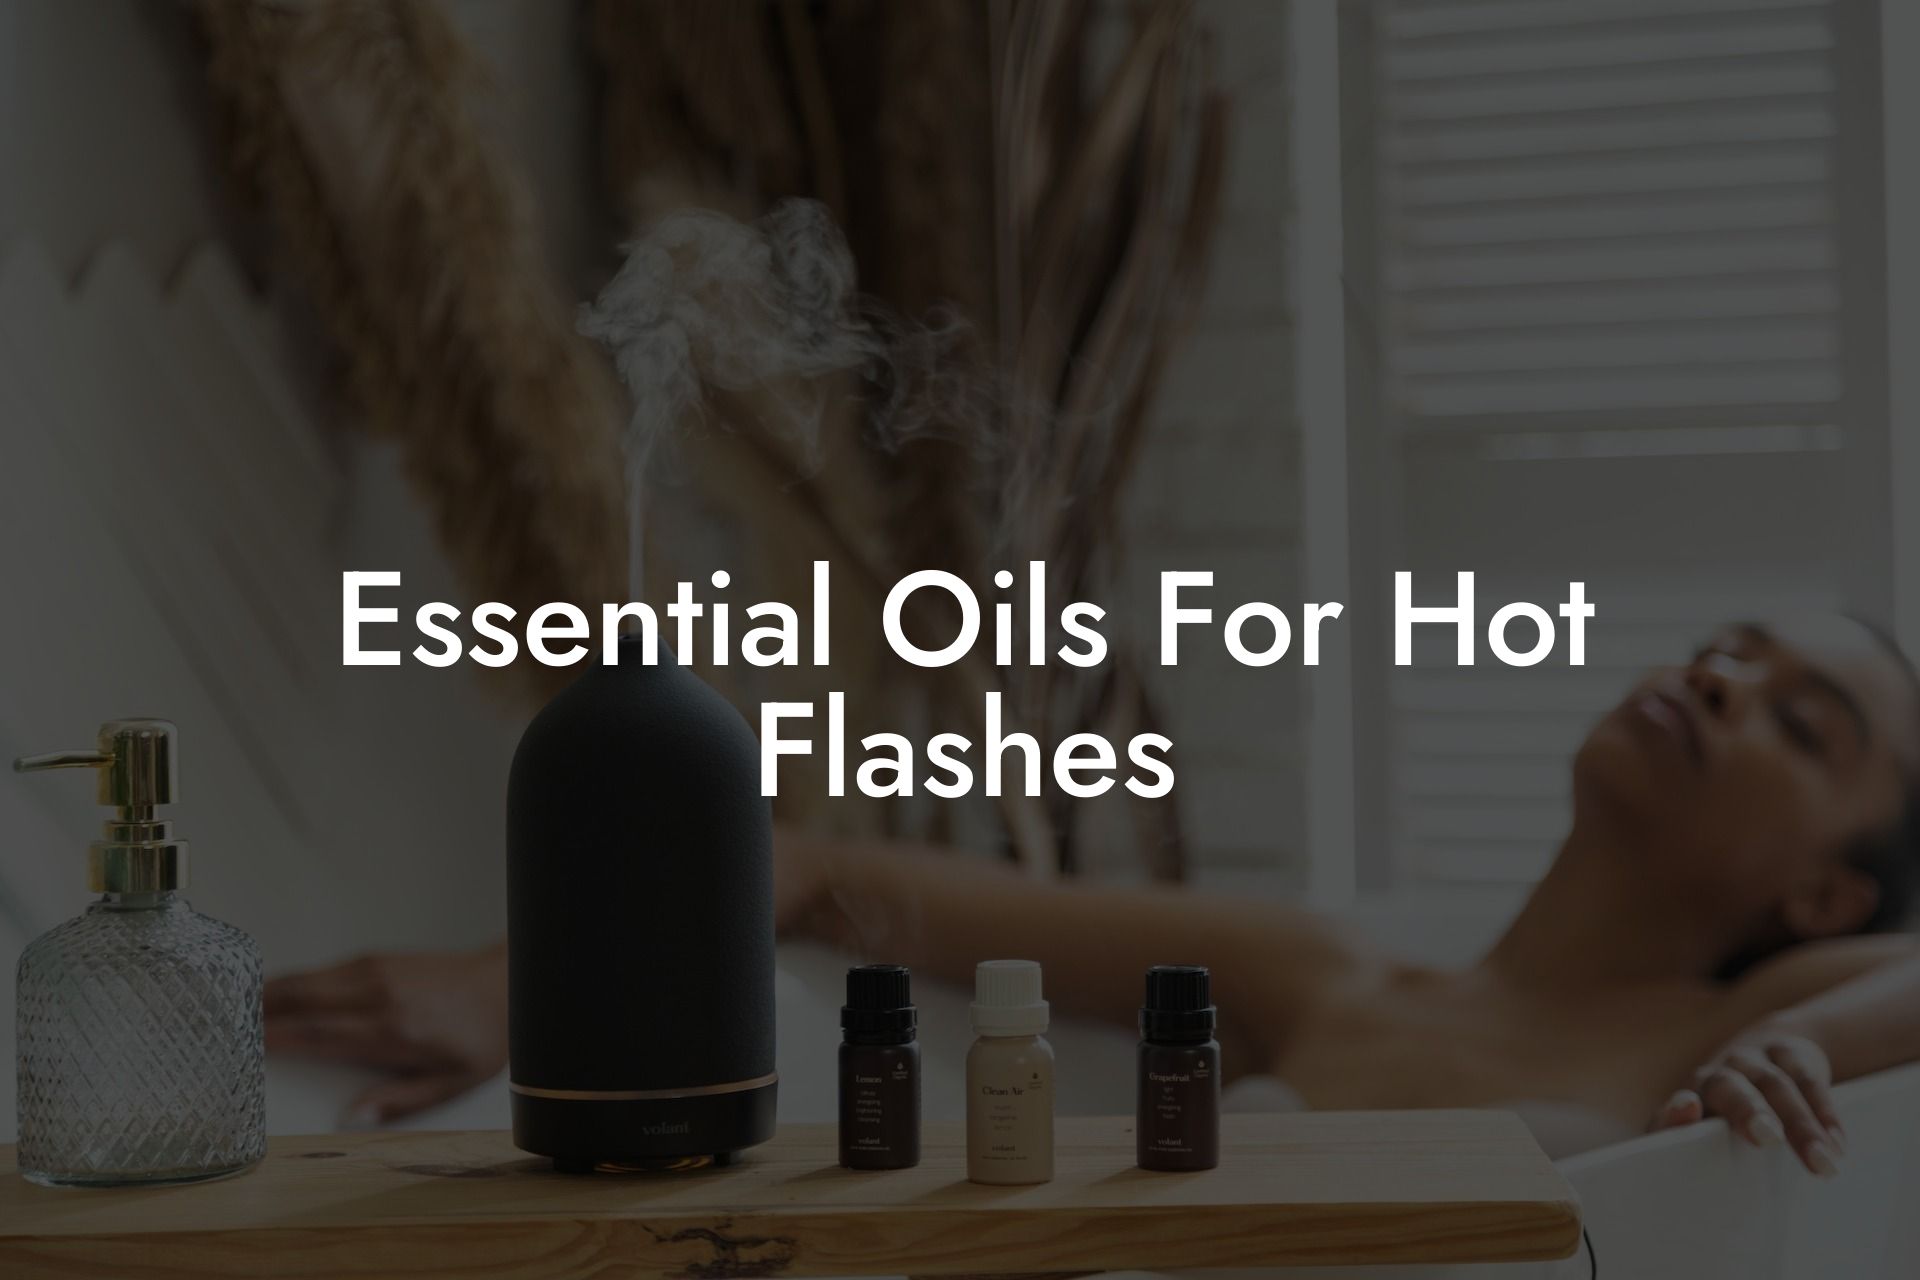 Essential Oils For Hot Flashes